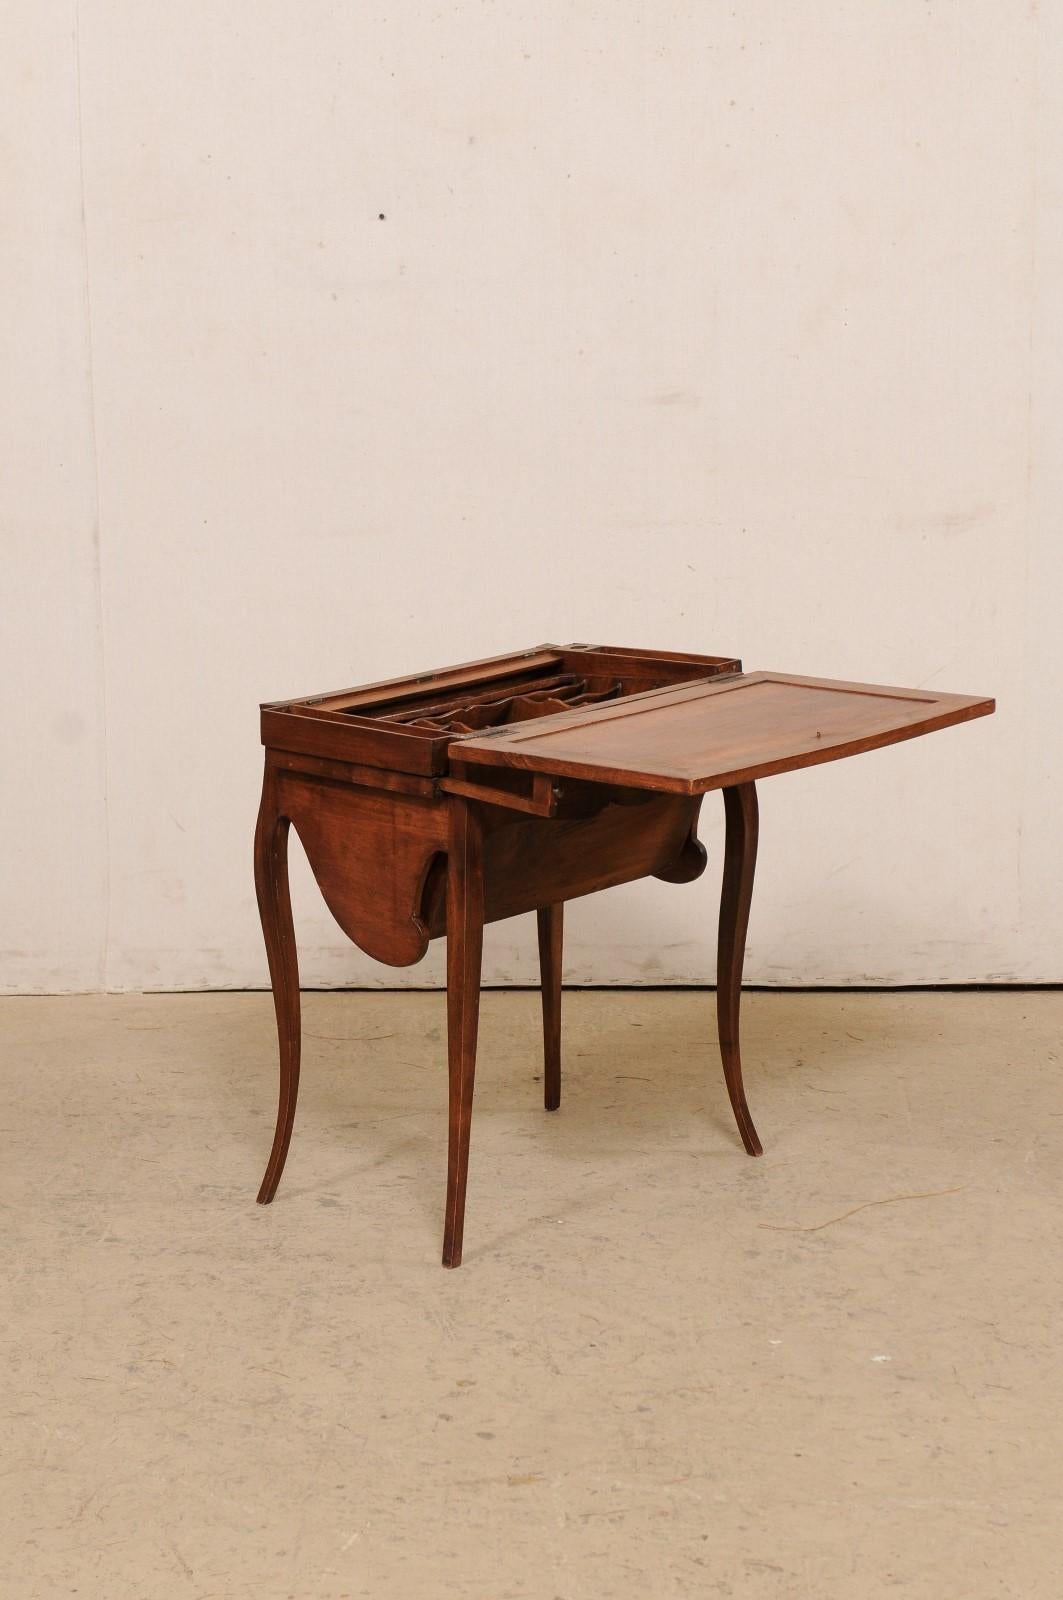 French 19th C. Table w/ Unusual & Creative Drop Down Storage-Great for Crafting 3